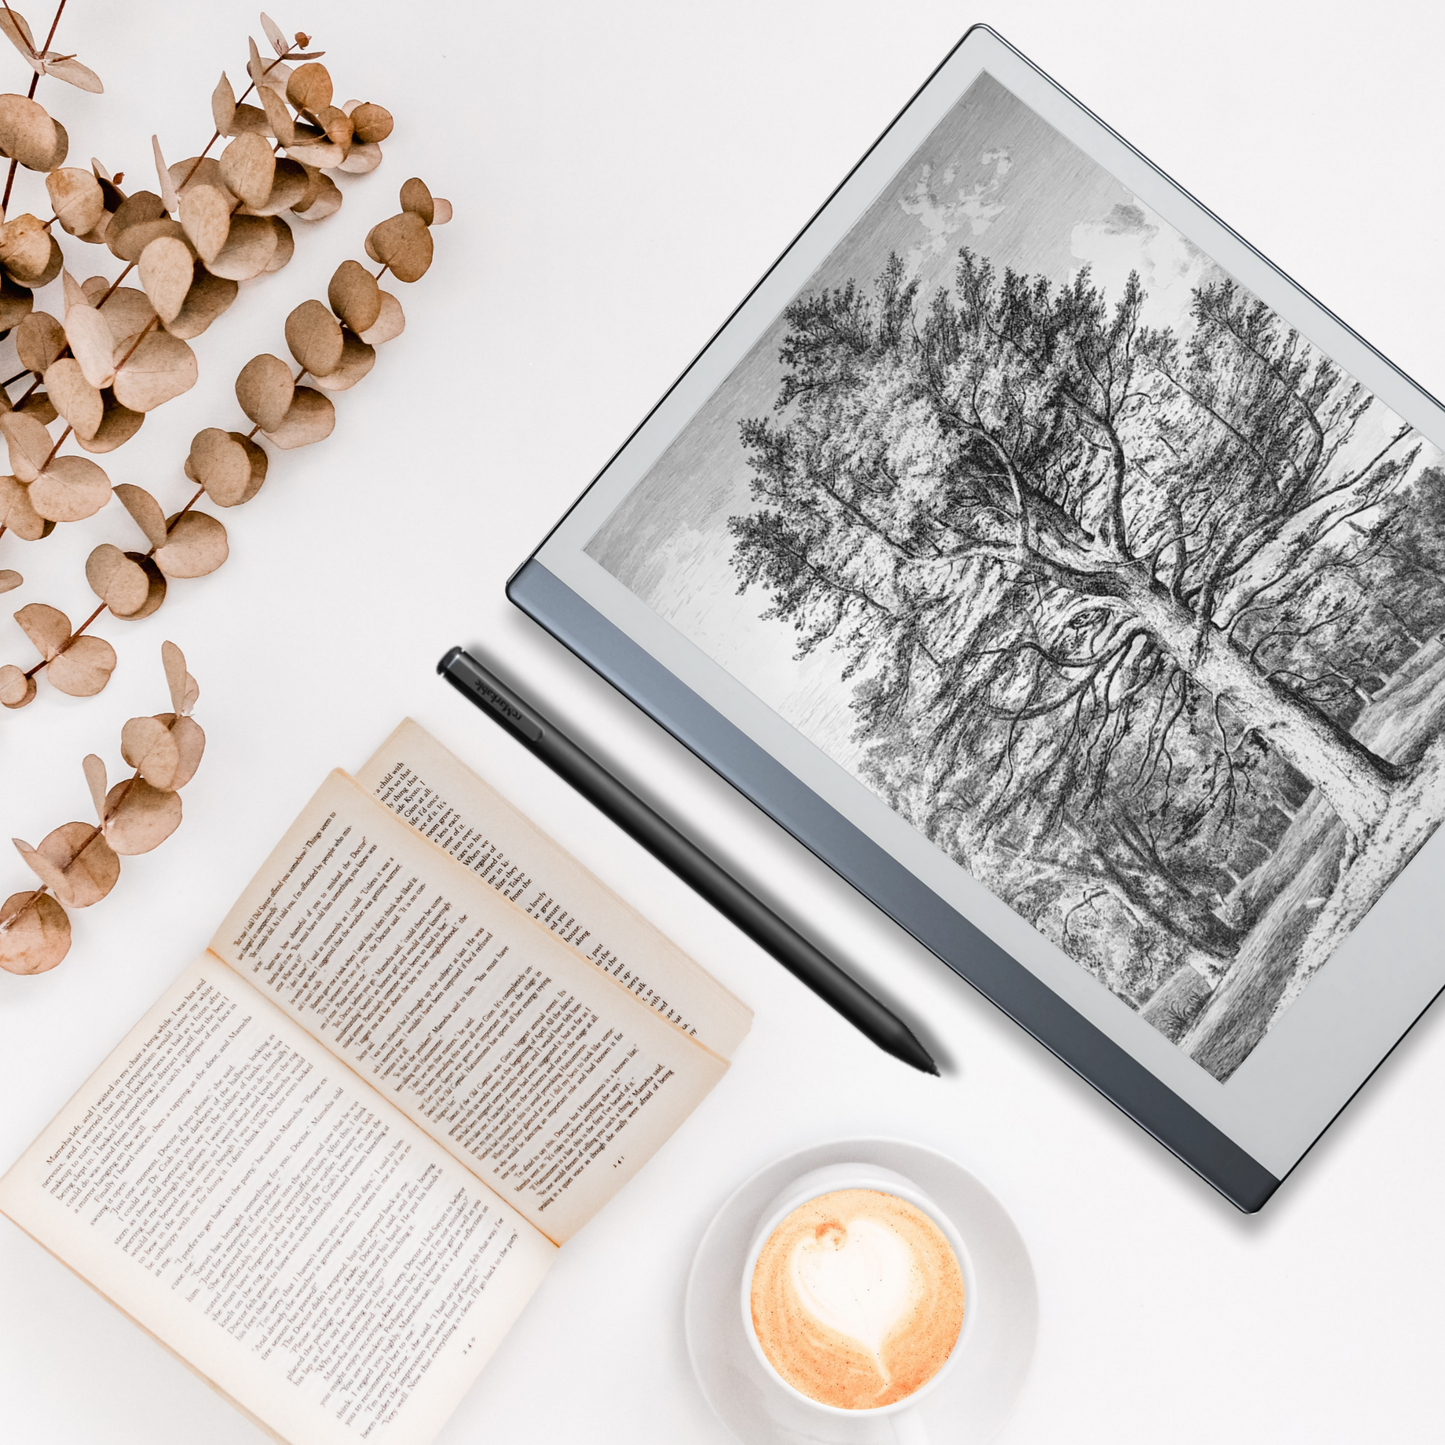 Remarkable 2 Sleep Screen & Notebook Cover Artwork - Creative Tree Sketches by Hand